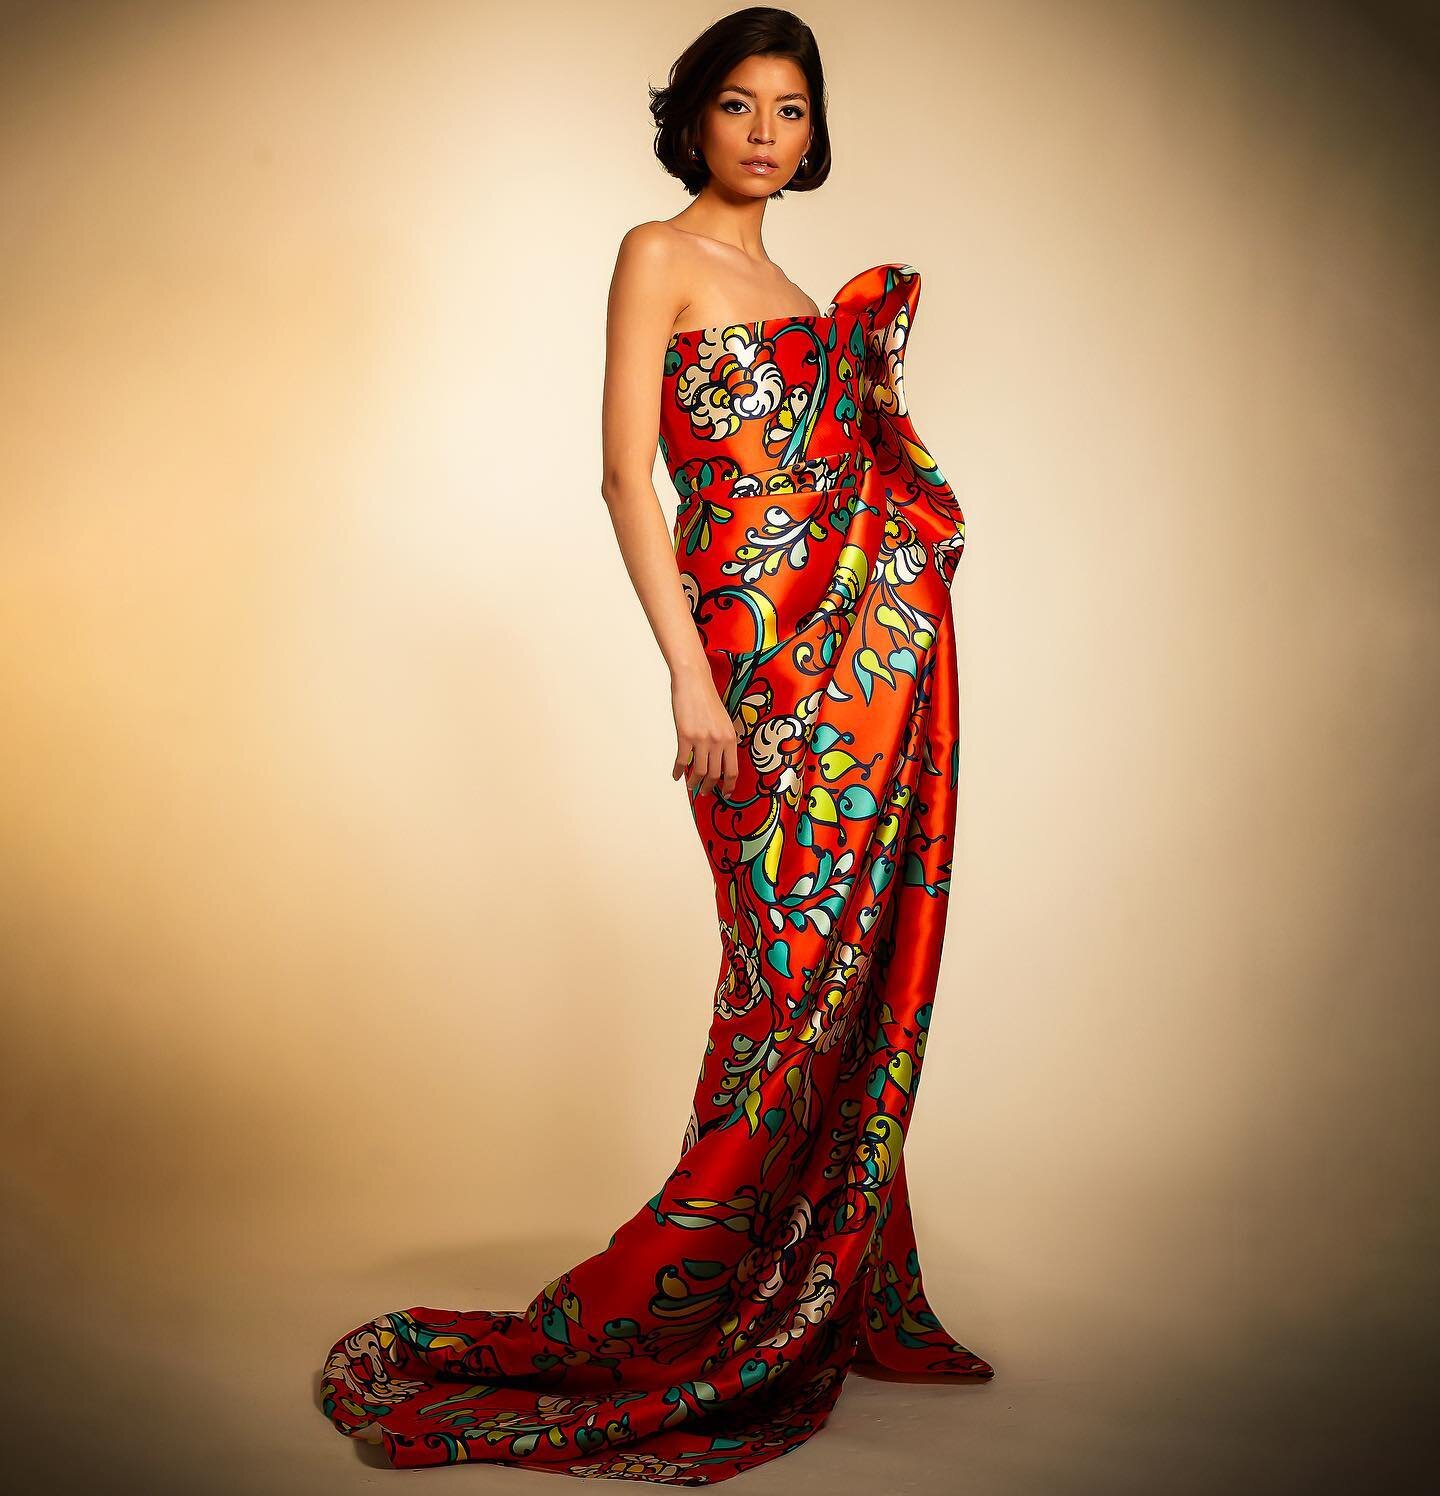 🏵Maiolica Monday🏵
Lustrous mikado swirls throughout this hand-draped gown, that features a vibrant maiolica motif, creating a striking silhouette for the #MichaelFausto Chapter VI Collection